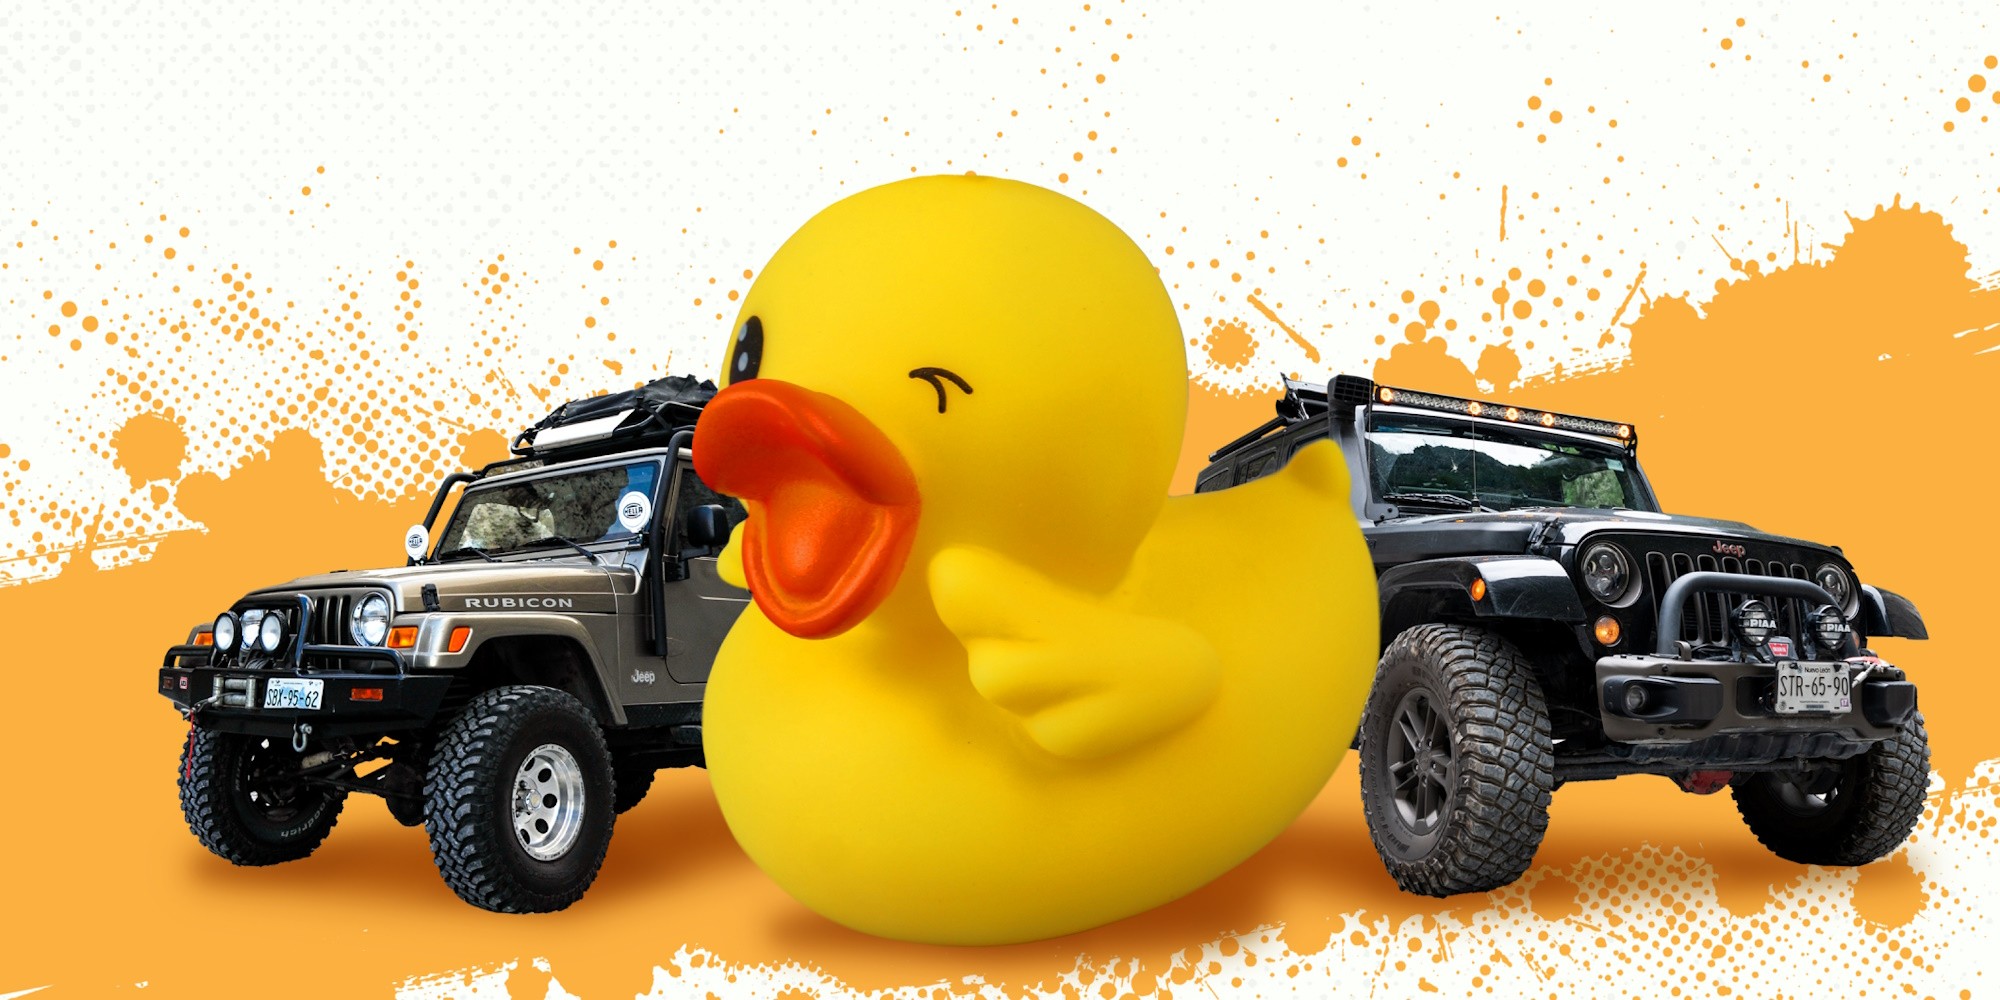 Jeep Ducking Is Still a Popular, Cutest Trend Within the Tight